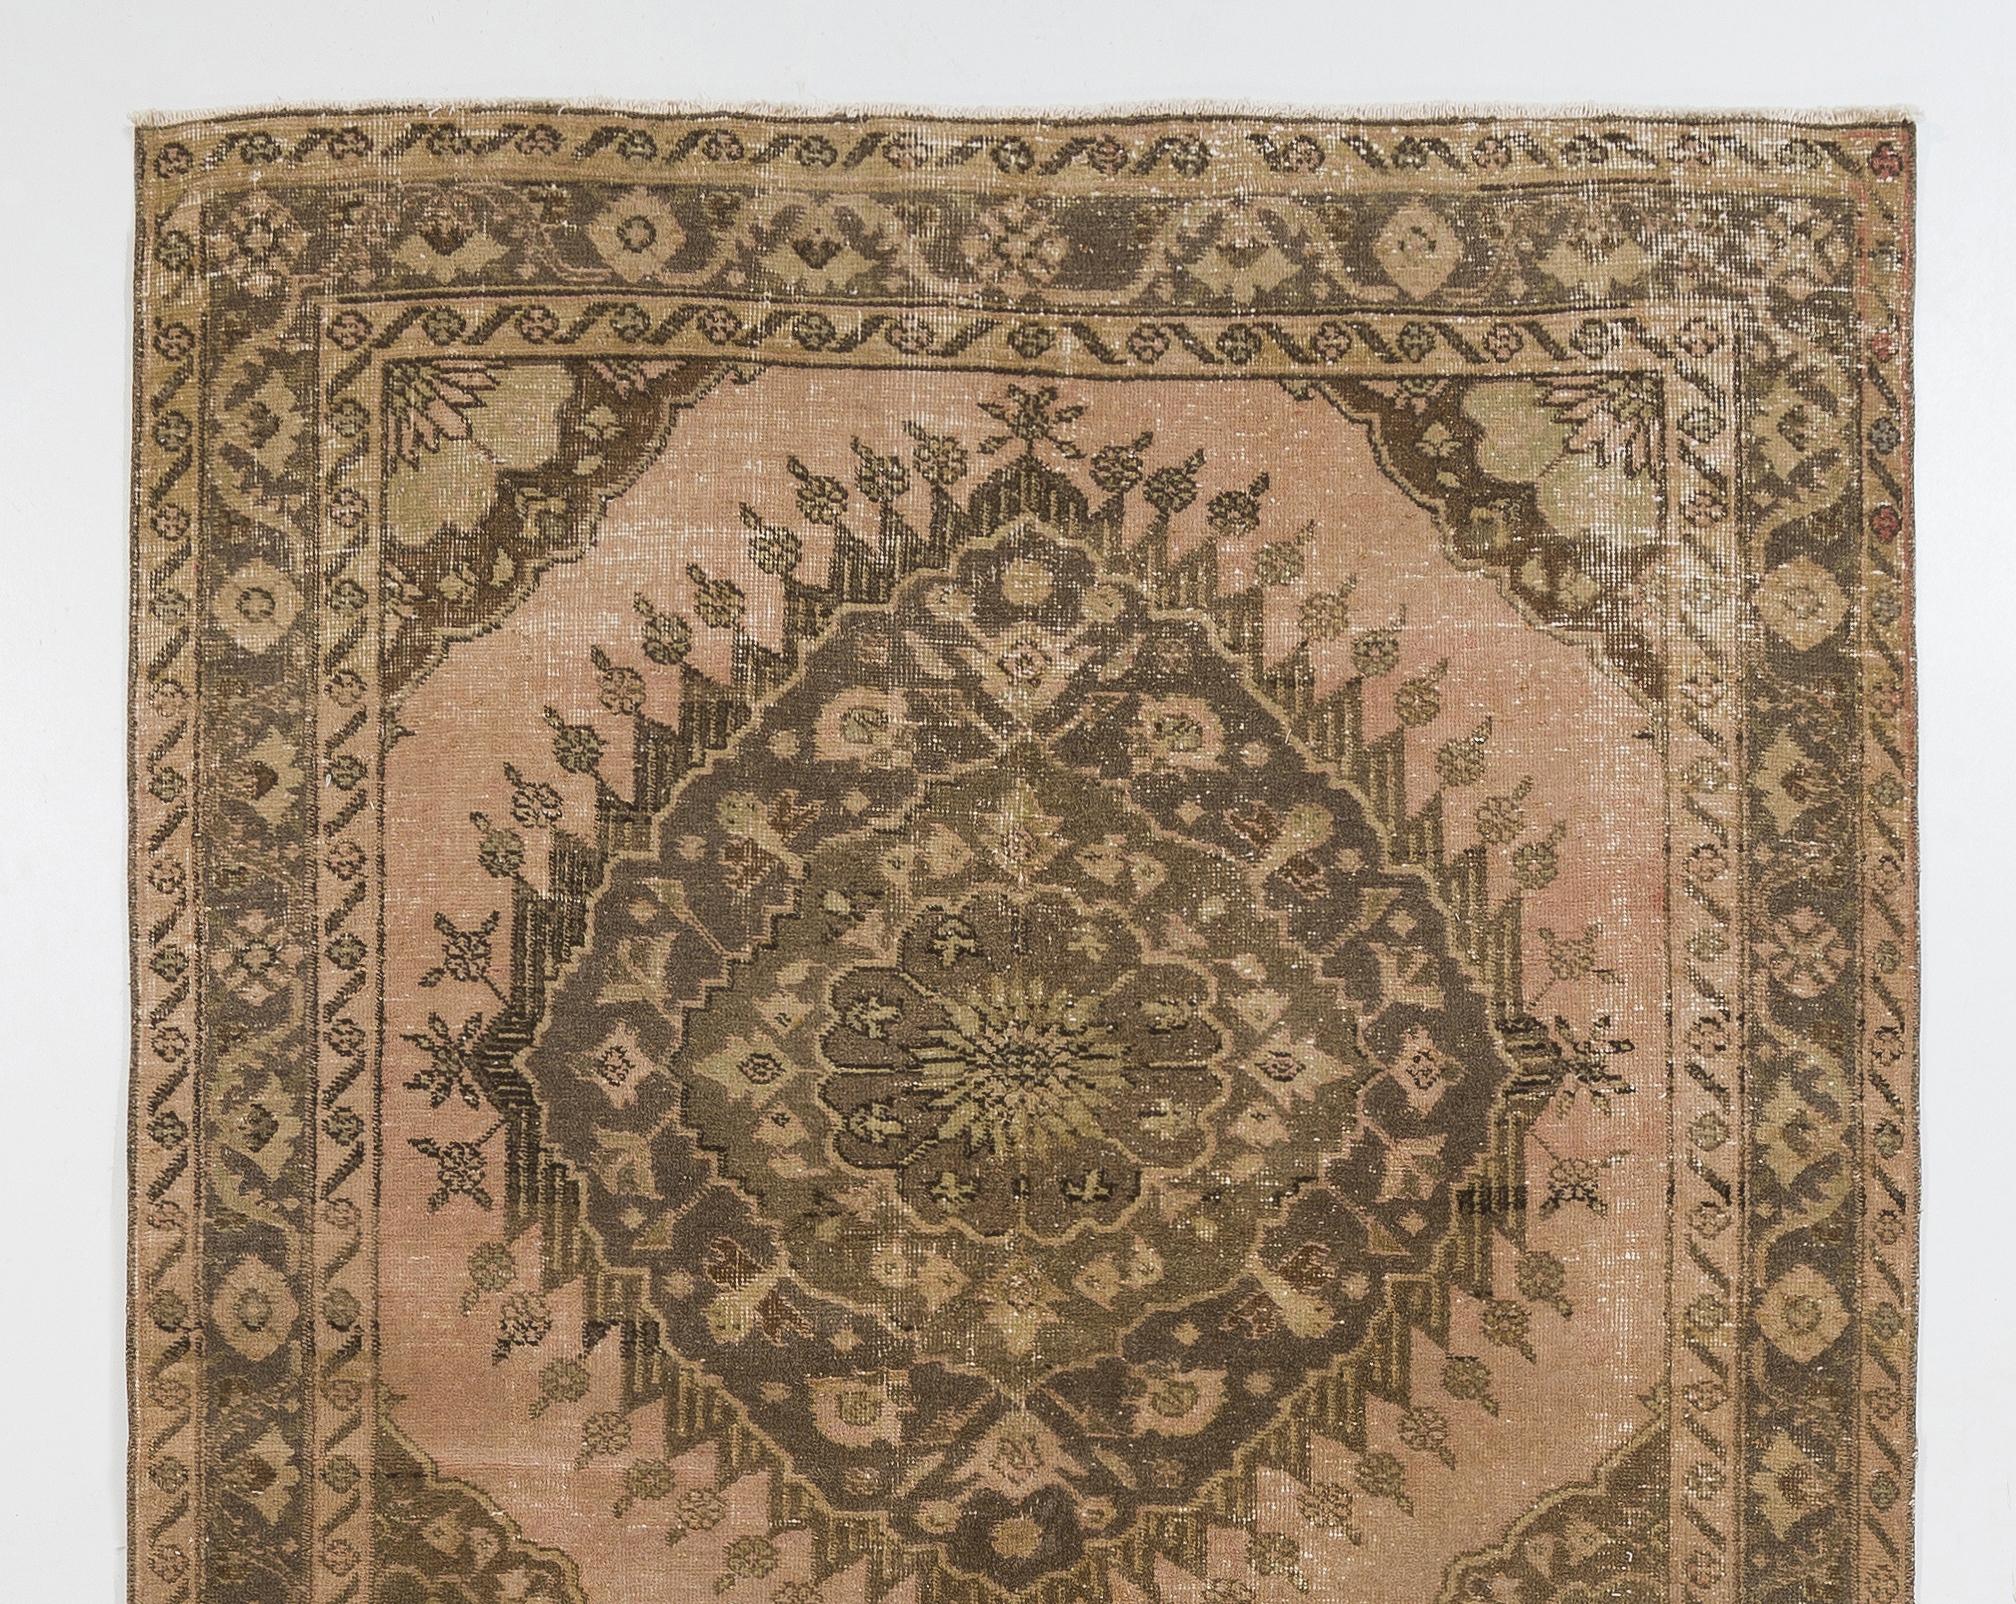 Step into the allure of centuries-old craftsmanship with the Vintage Handmade Turkish Oushak Runner Rug, a stunning testament to the artistry of Anatolian weavers. Originating from the historic region of Oushak in Turkey, this rug exudes timeless